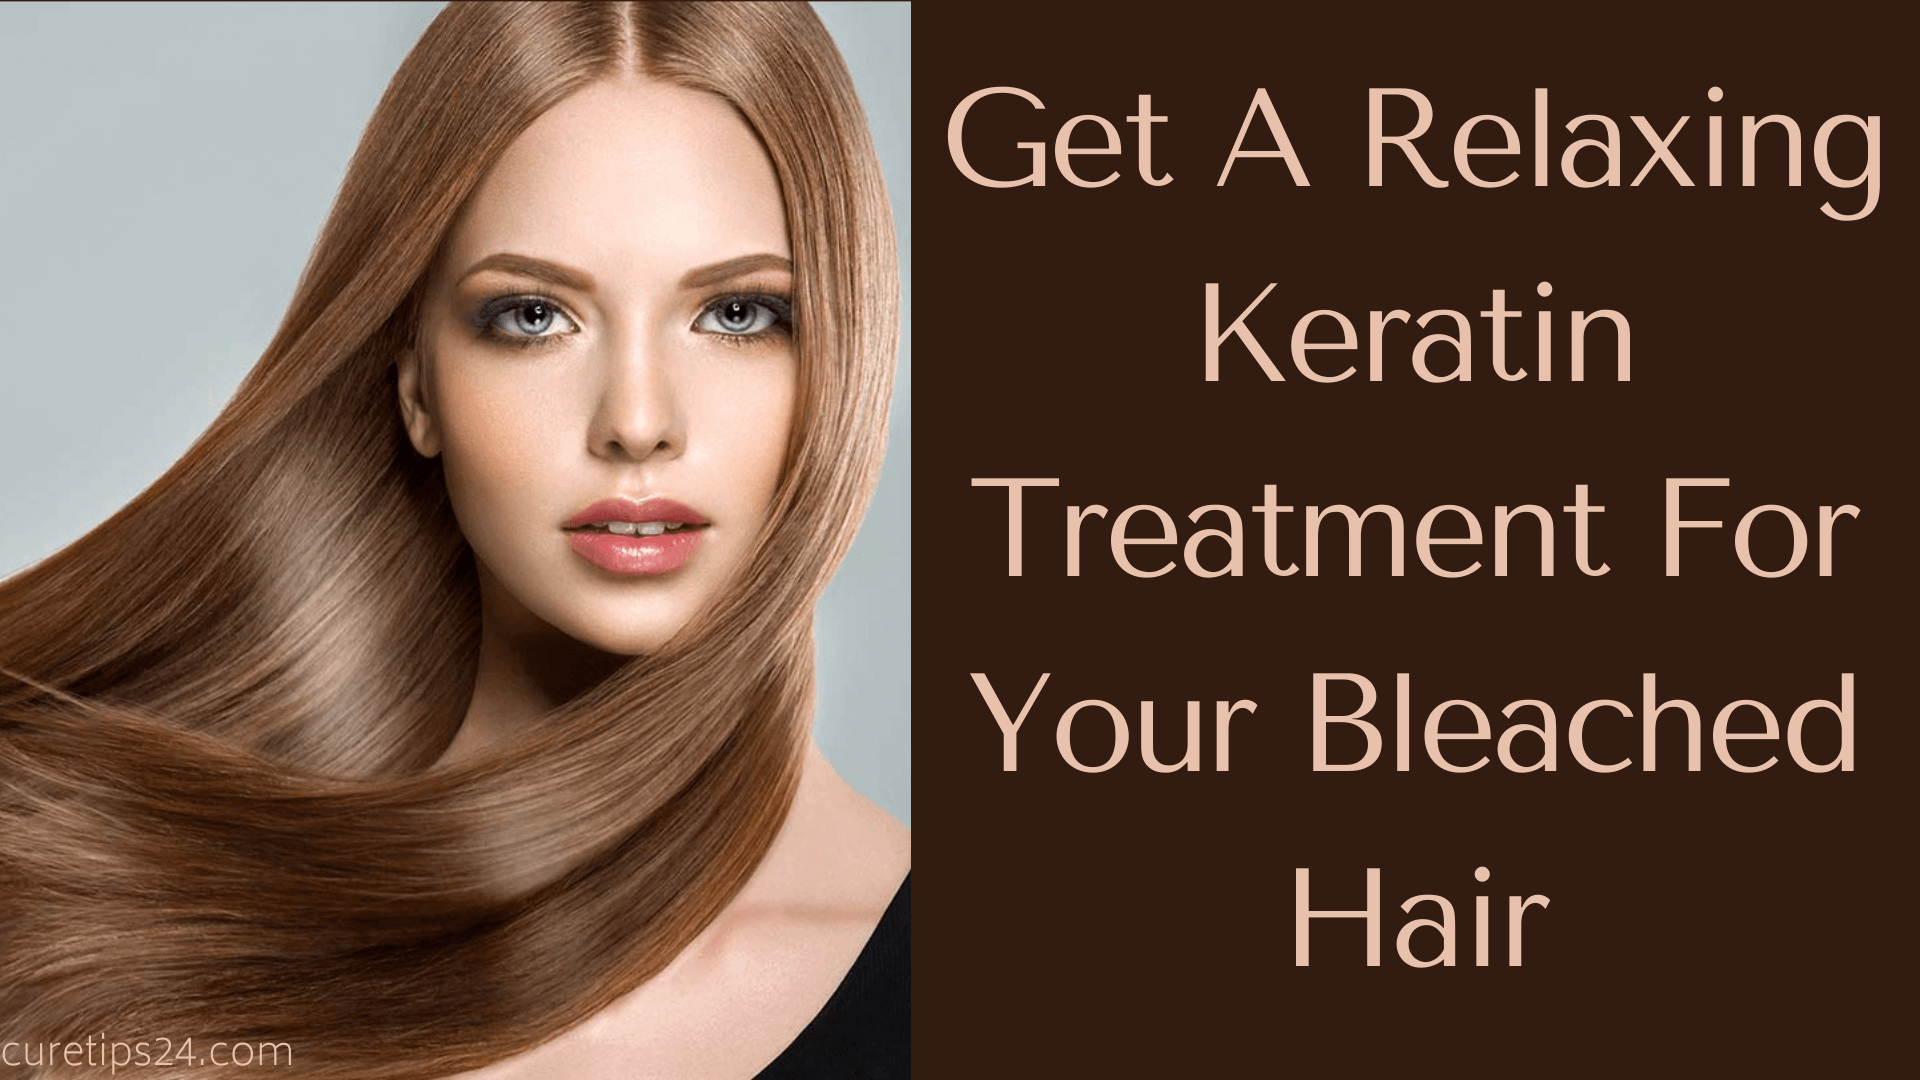 Keratin Treatment For Your Bleached Hair